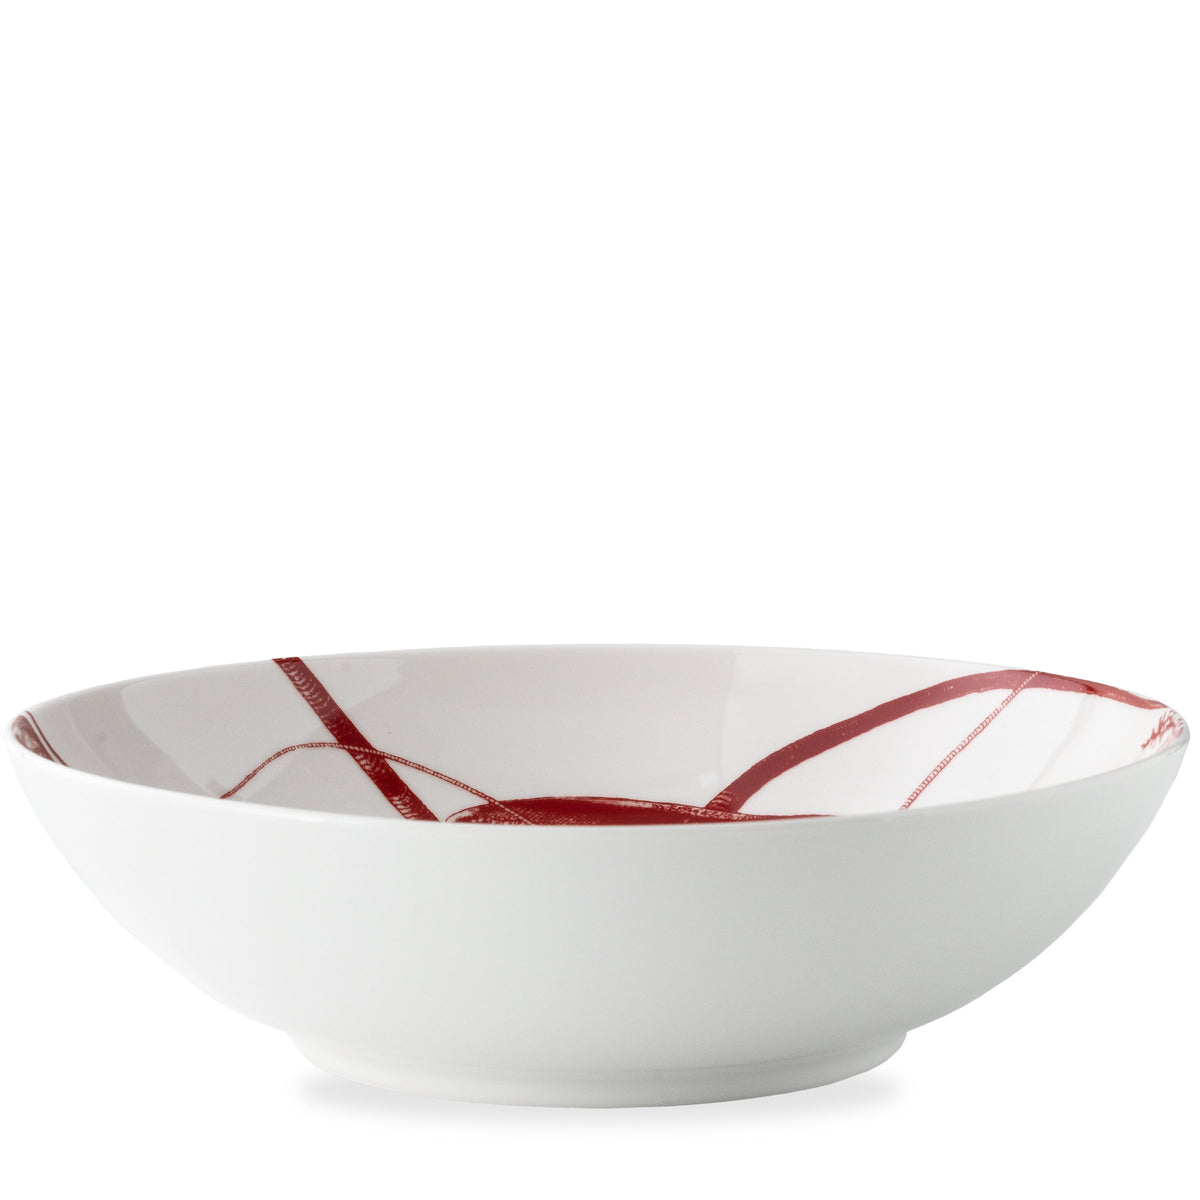 A Caskata Artisanal Home Lobster Wide Serving Bowl Red with red lines on it, perfect for showcasing lobsters.